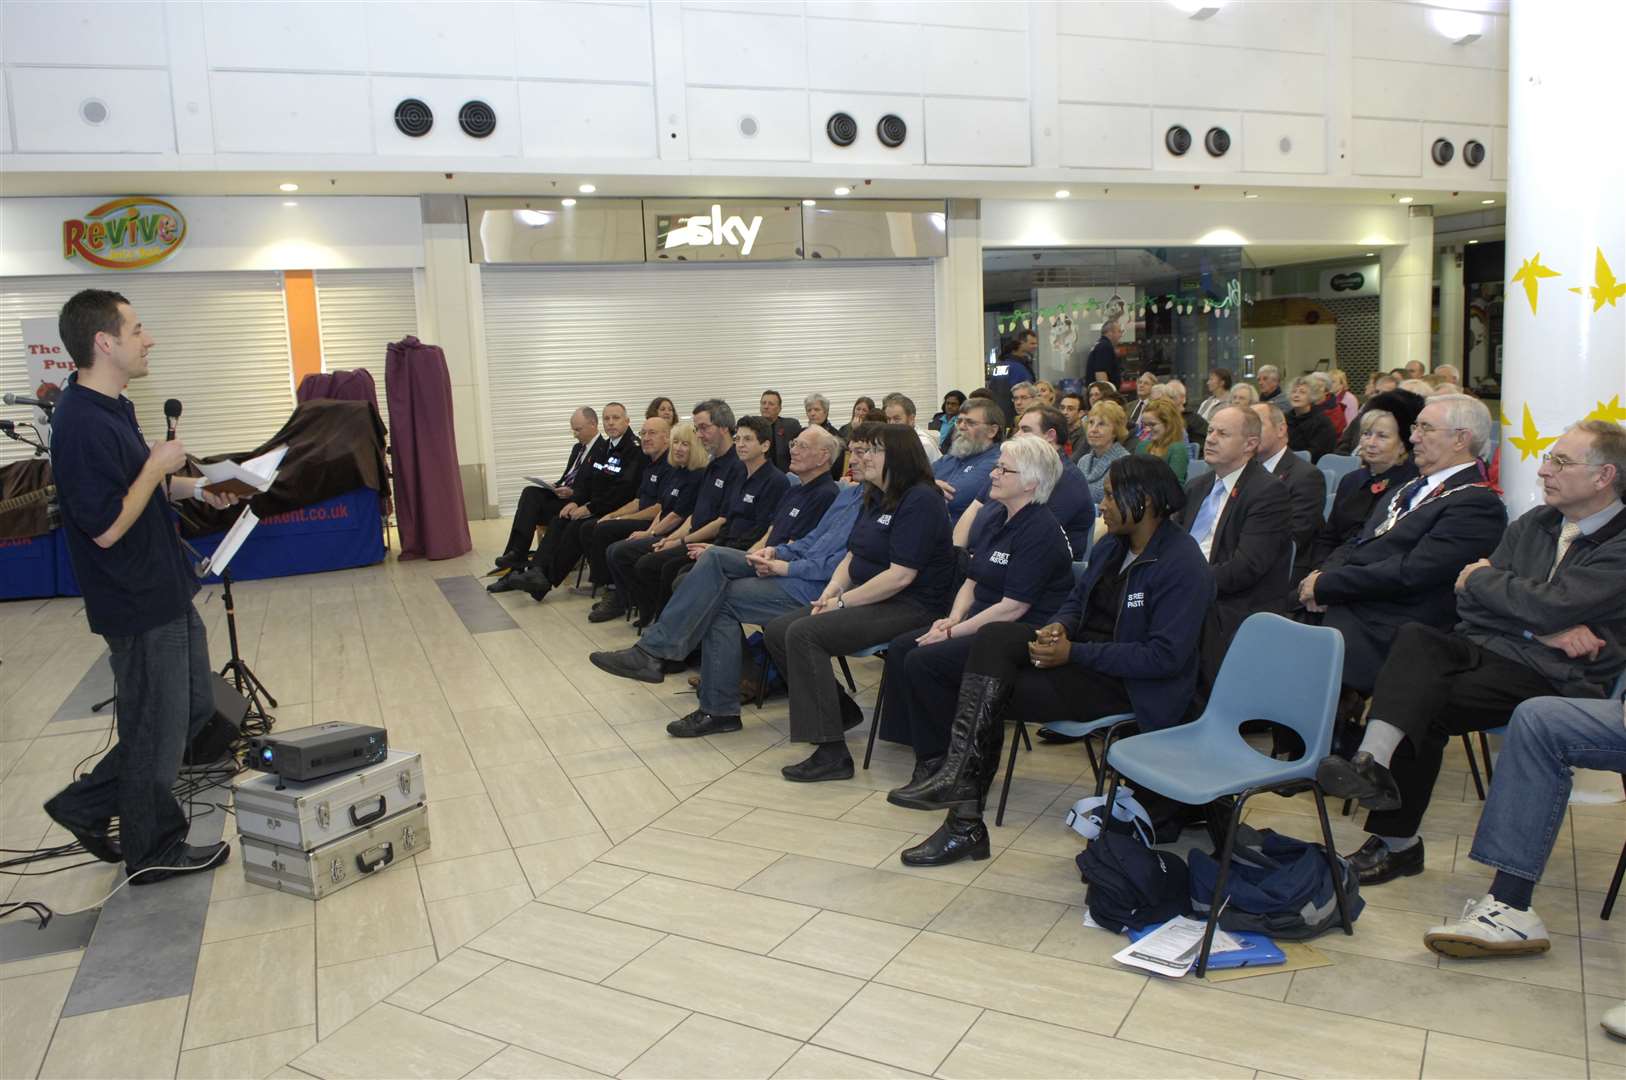 The launch of the Ashford Street Pastor scheme in 2010. Picture: Gary Browne